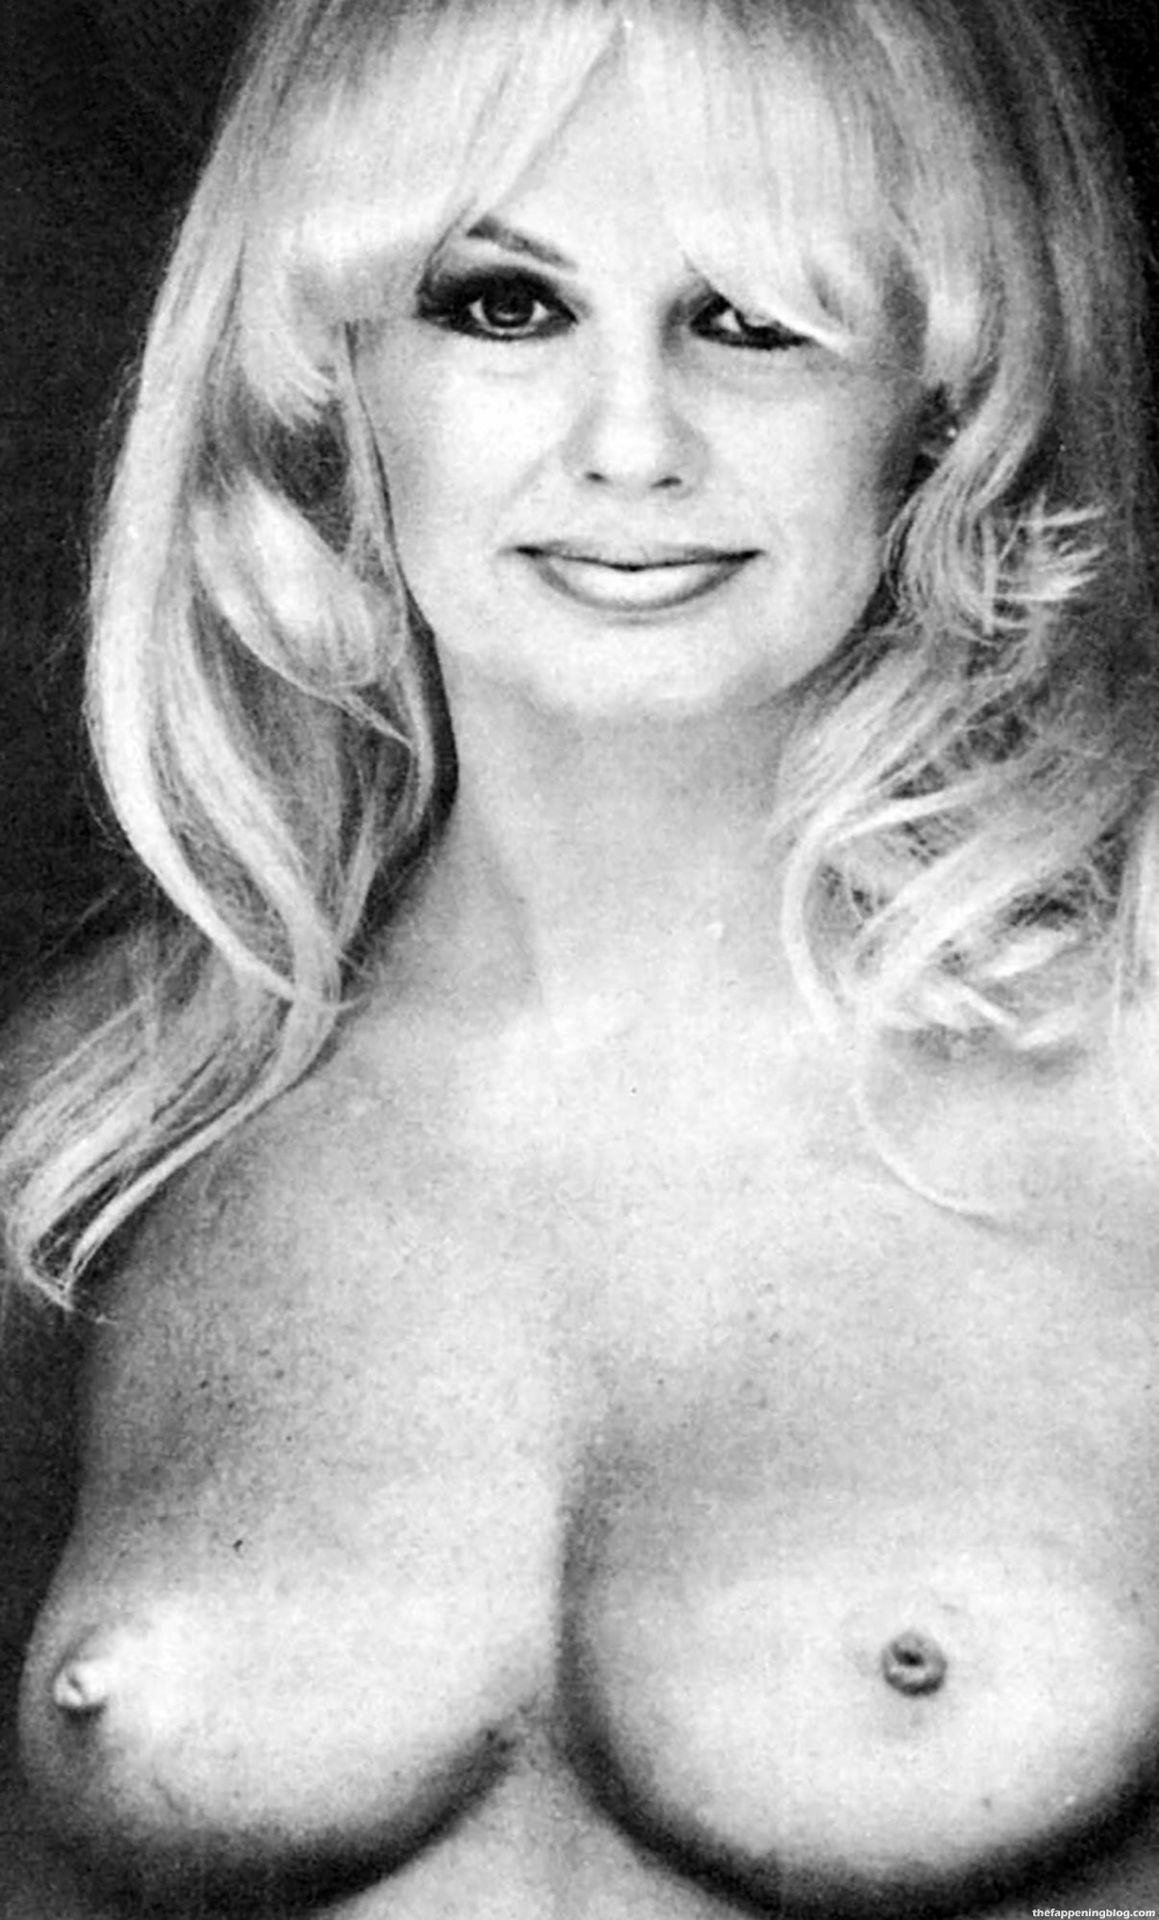 Check out Mamie Van Doren’s nude photo collection. 